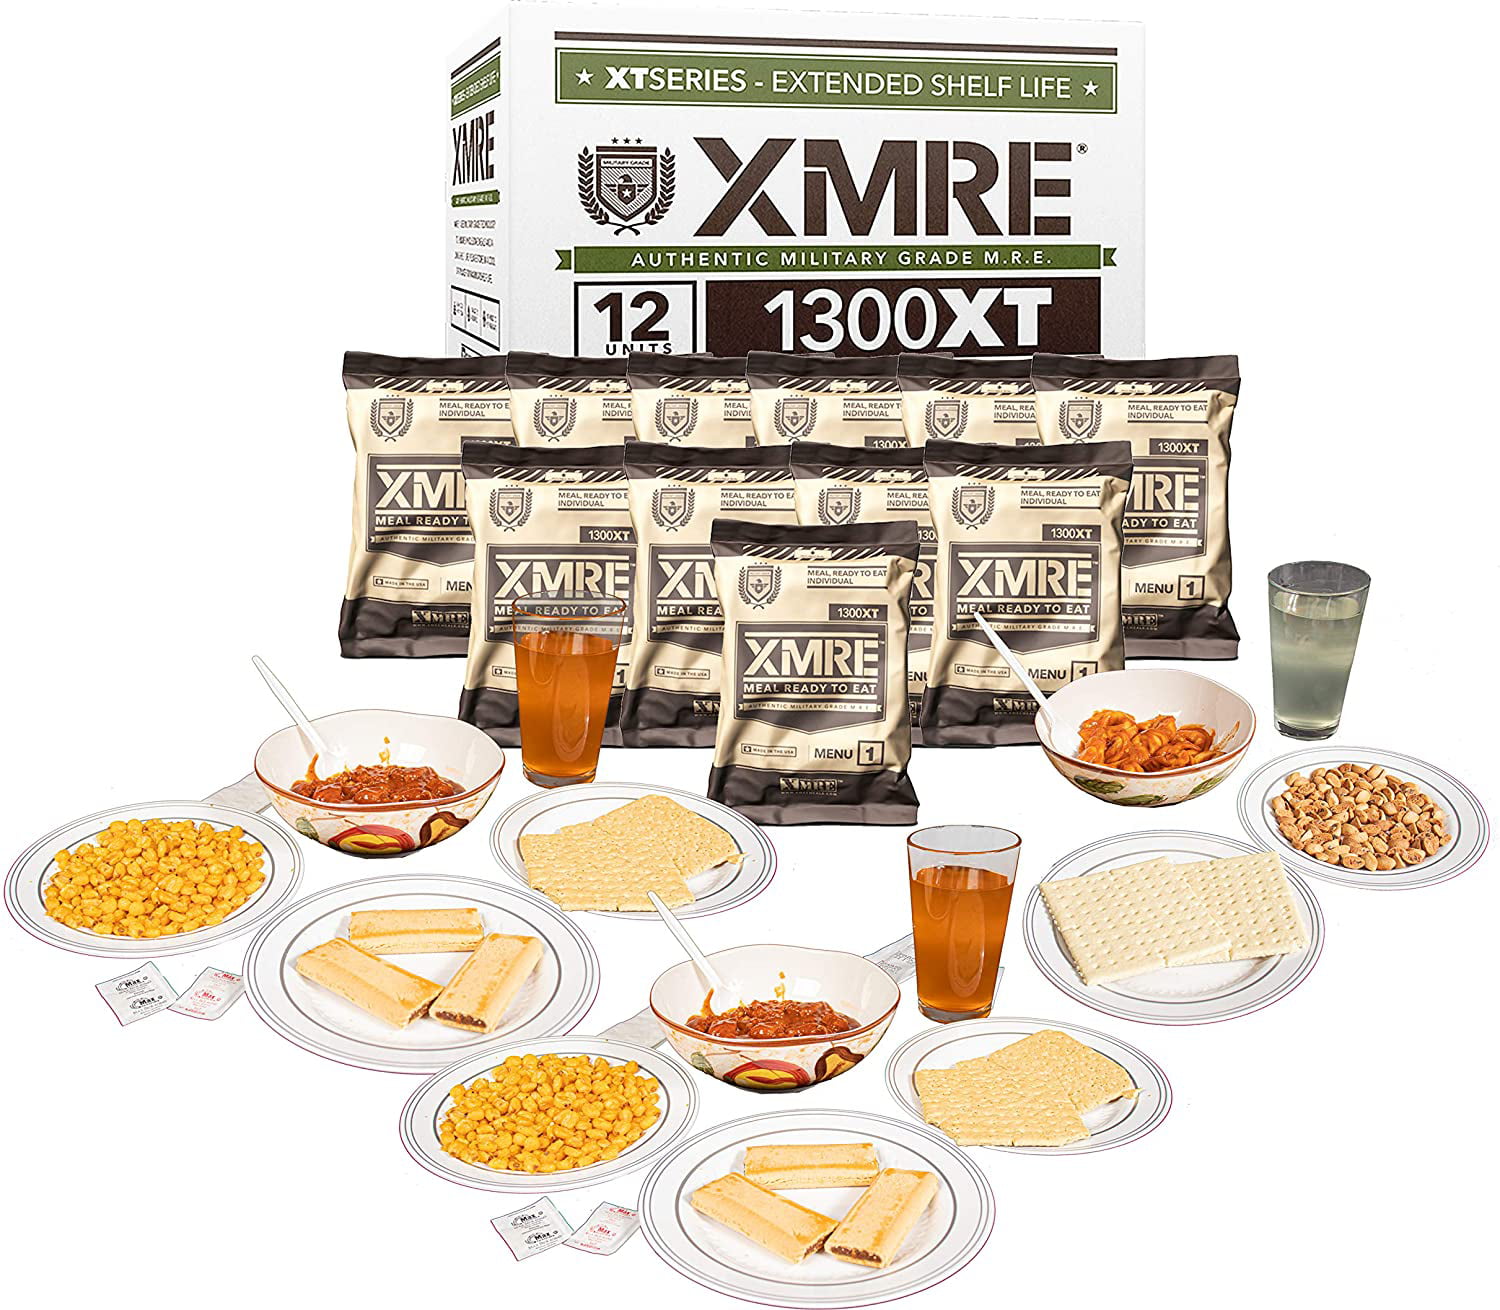 XMRE 1300XT Ready to Eat Meals for Emergency Preparedness 